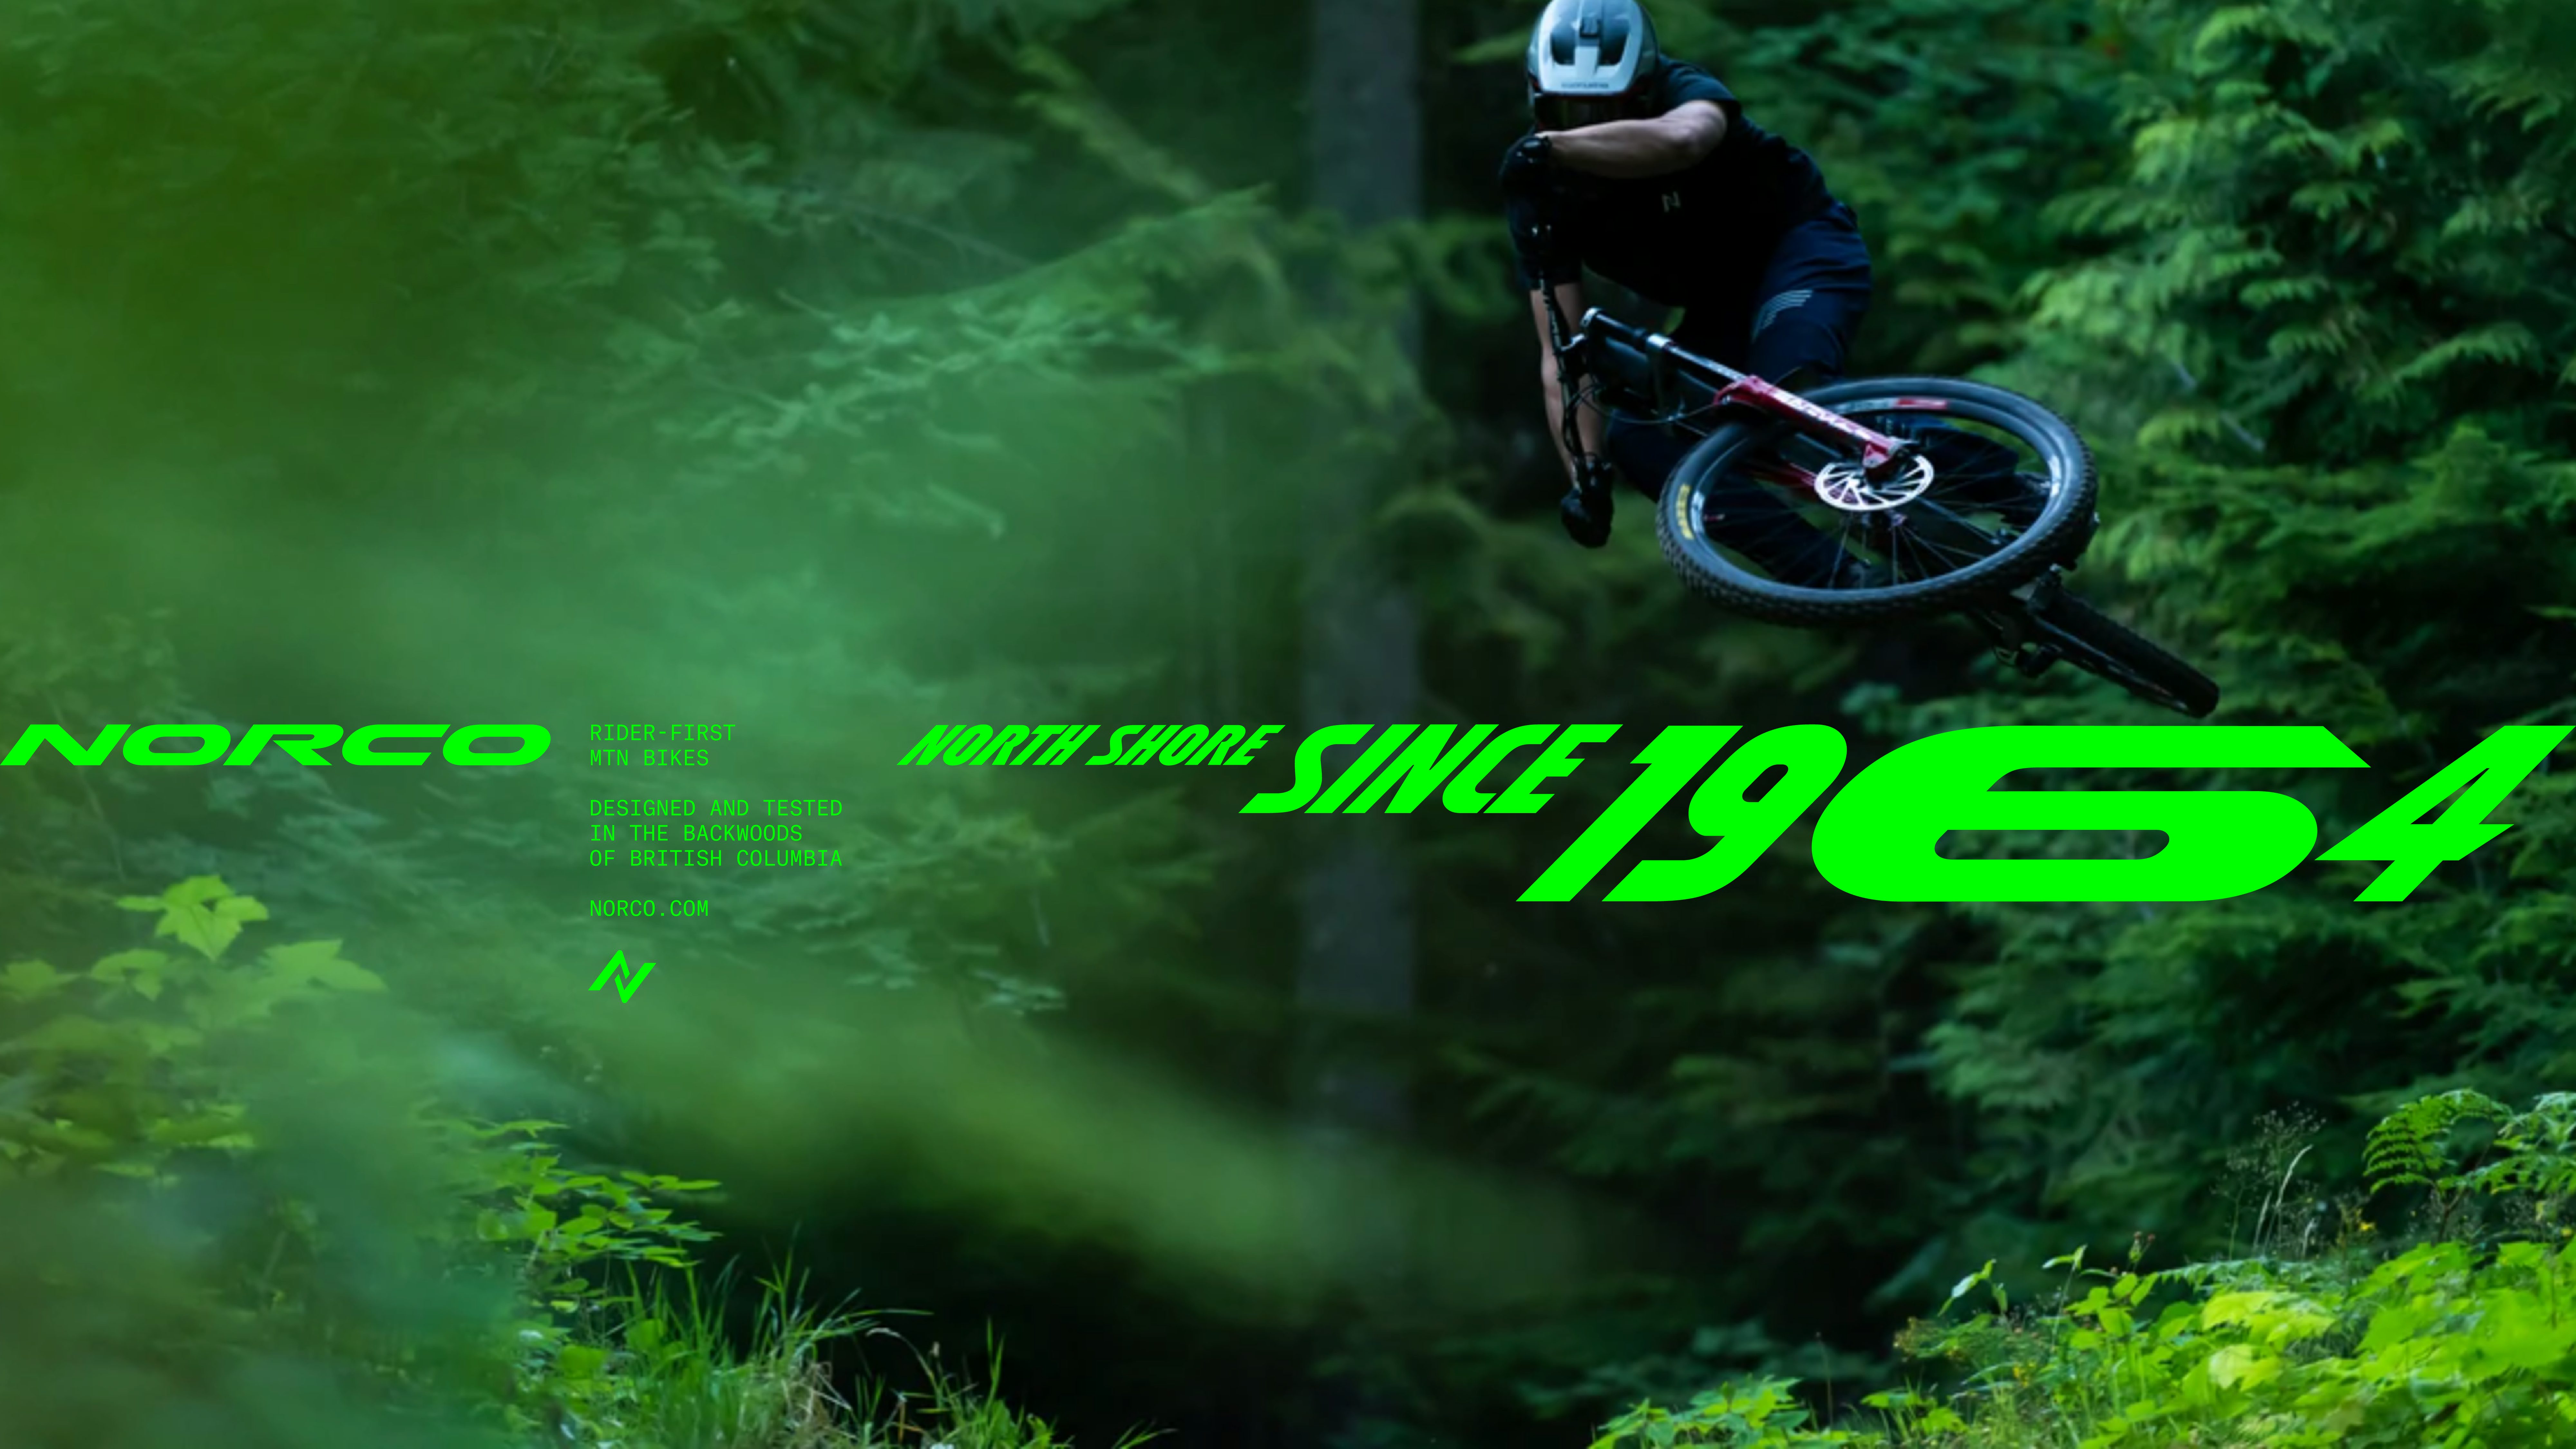 Norco bicycles rebrand